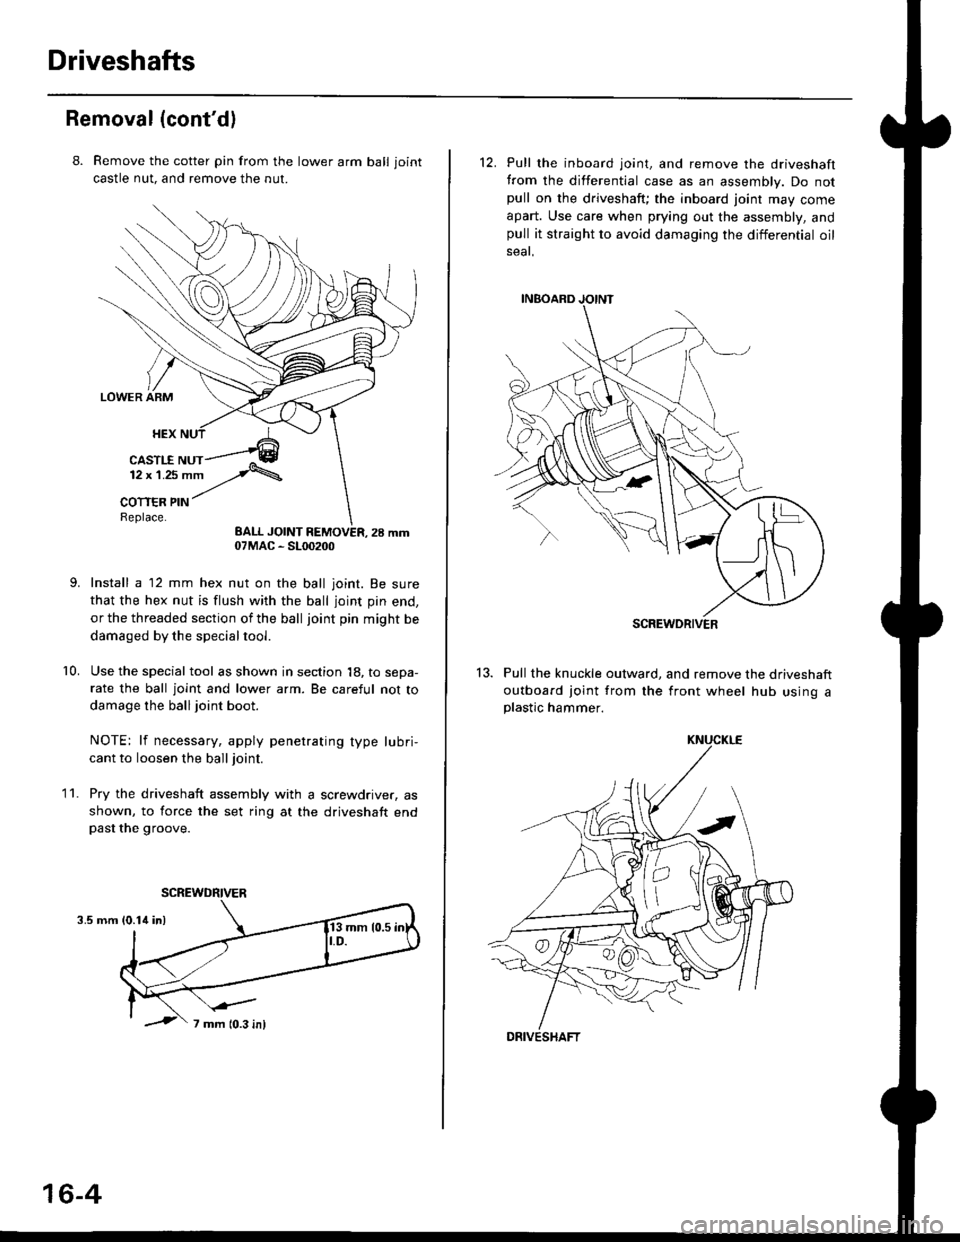 HONDA CIVIC 1999 6.G Workshop Manual Driveshafts
Removal (contd)
8. Remove the cotter pin from the lawer arm ball joint
castle nut. and remove the nut.
Install a 12 mm hex nut on the ball joint. Be sure
that the hex nut is flush with th